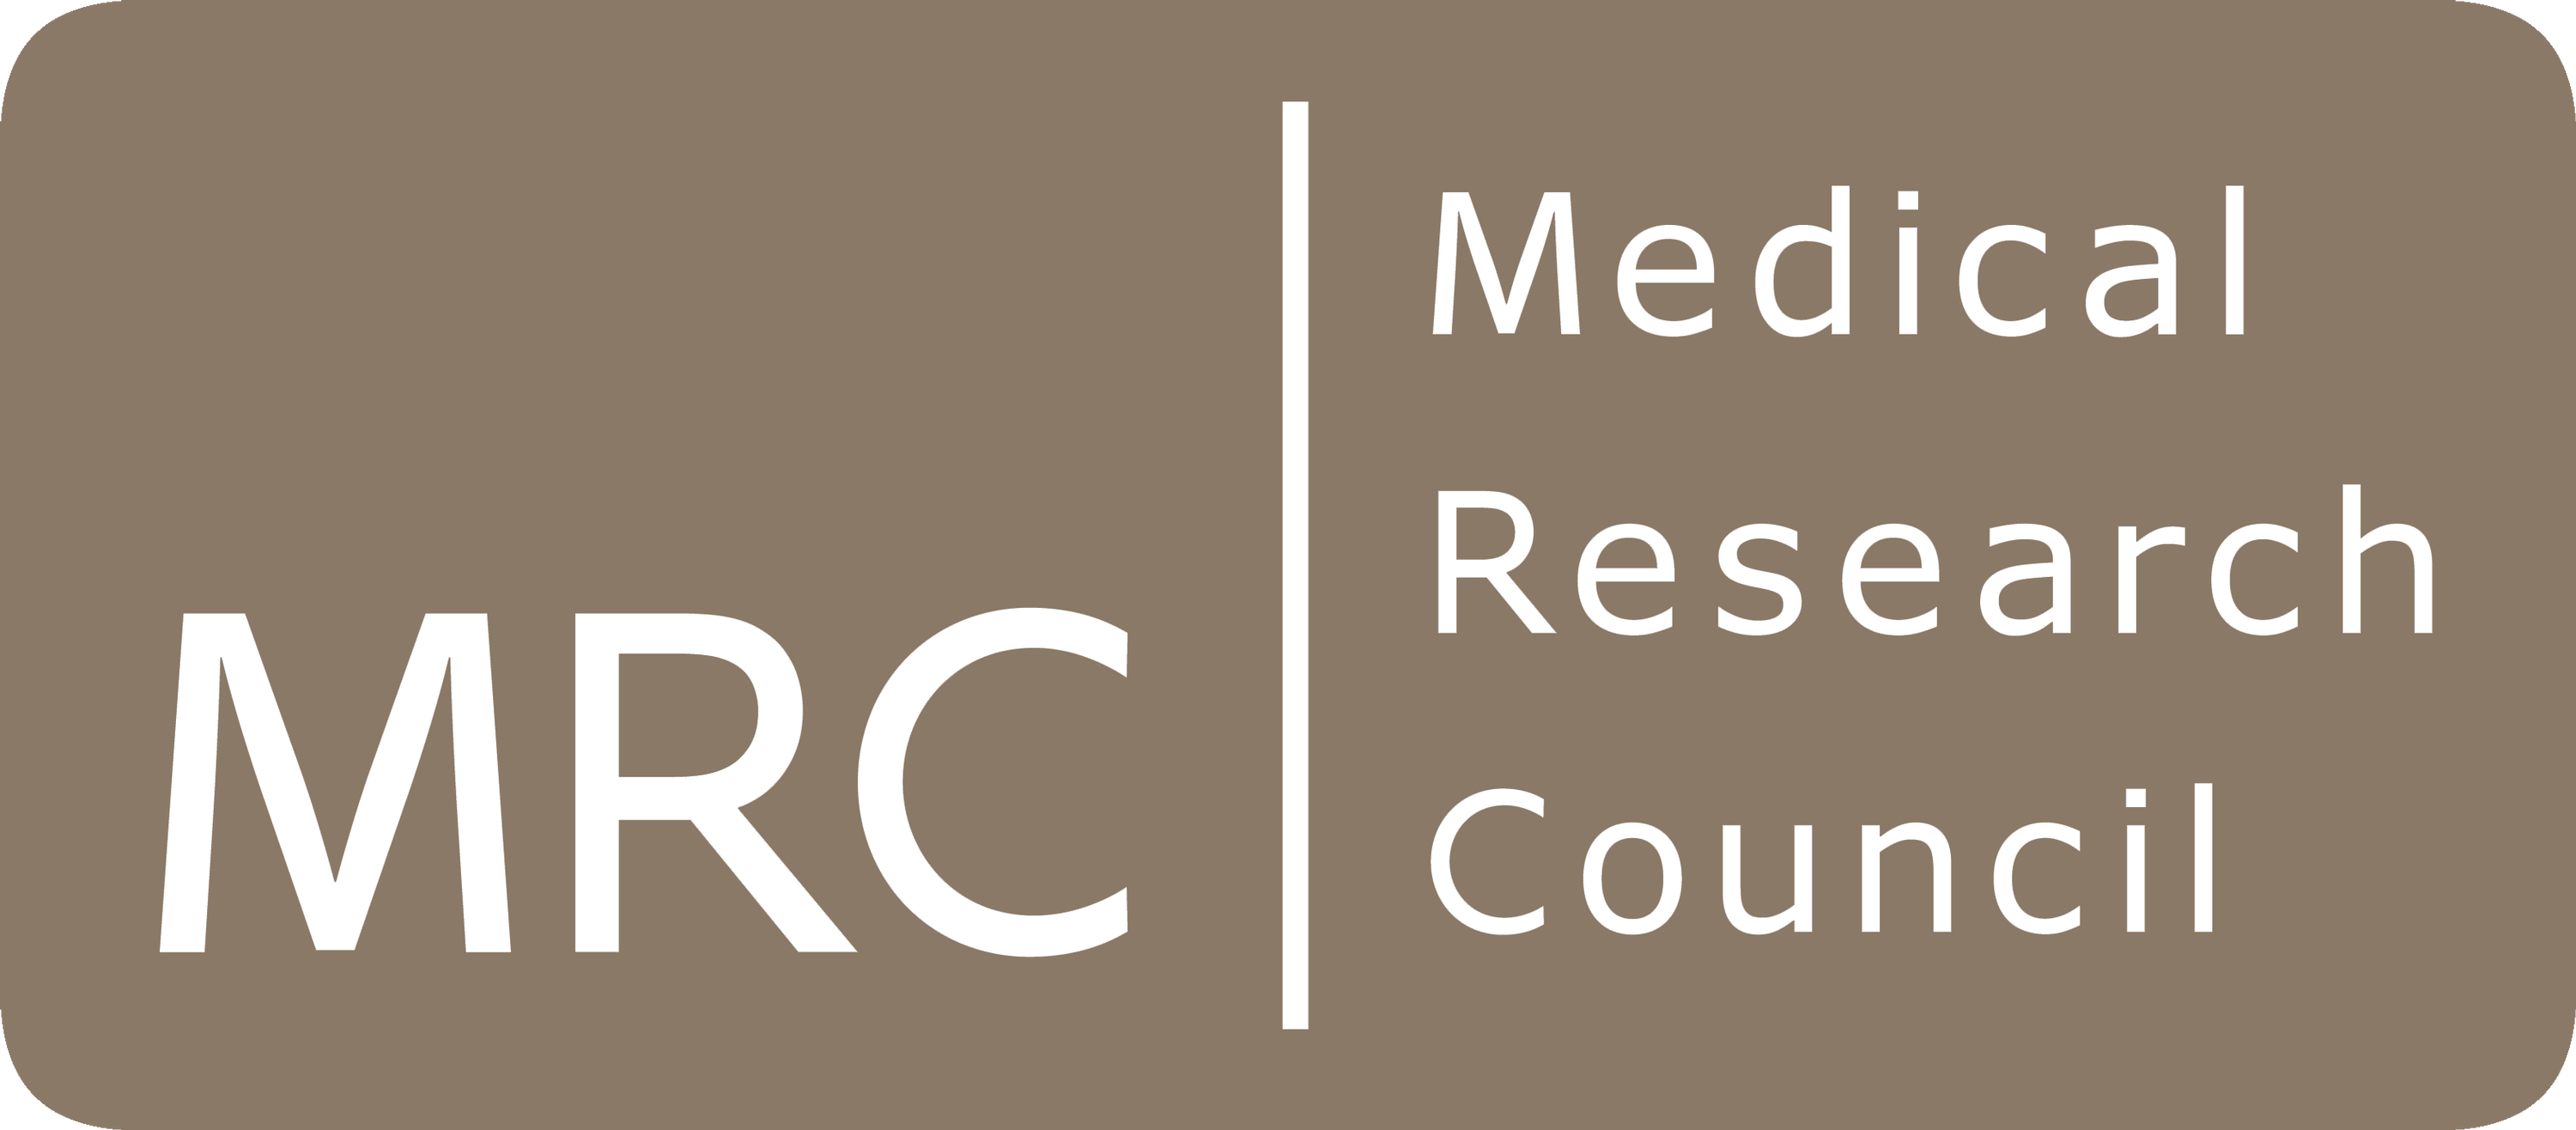 About Us Logo - Logos and strapline - About us - Medical Research Council